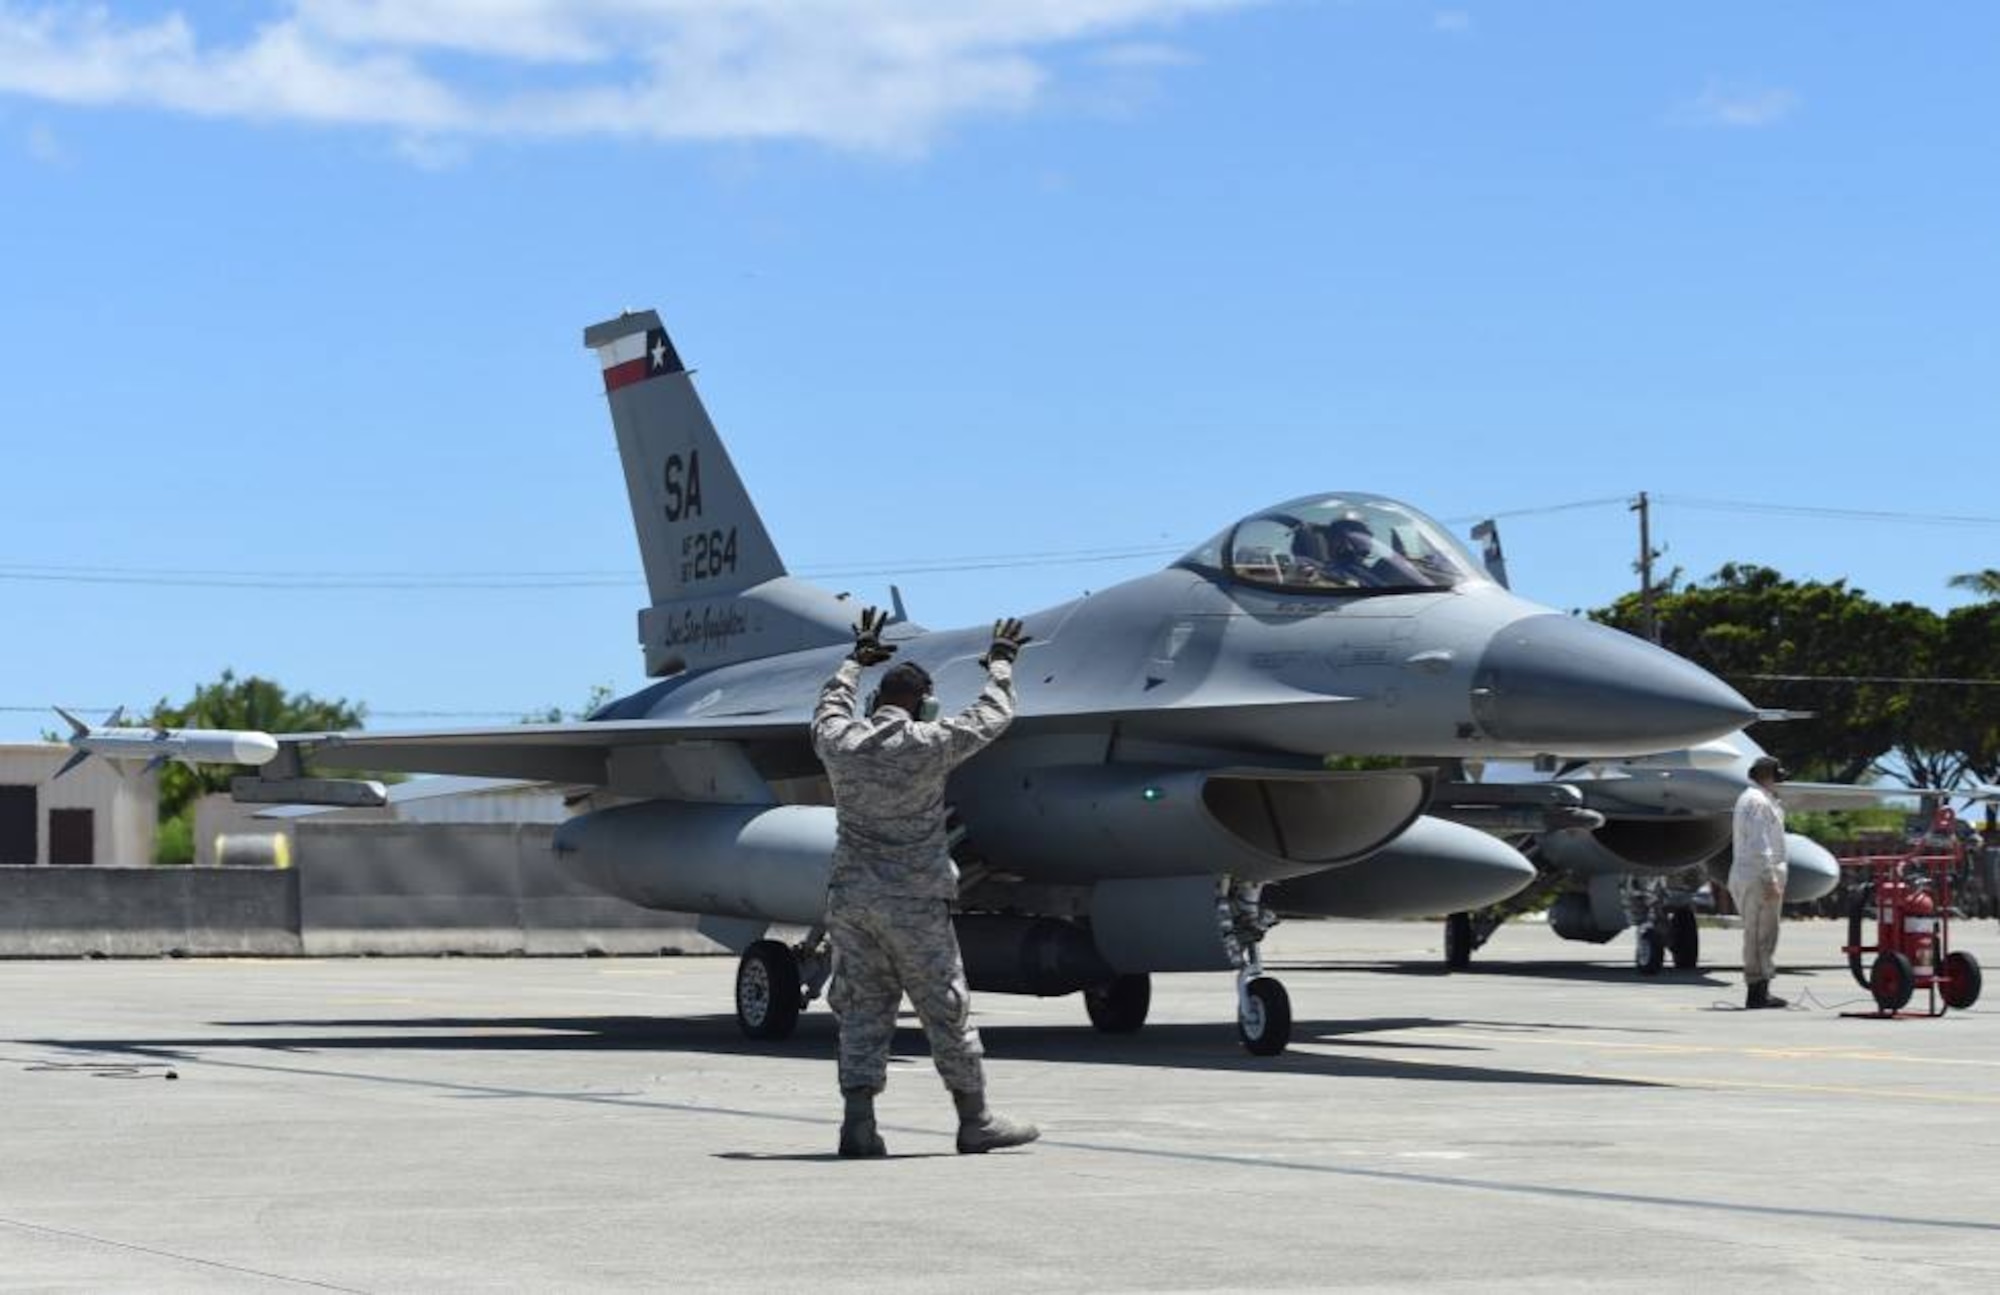 Tech. Sgt. Kevin Yamaguchi, a crew chief with the 149th Fighter Wing, Texas Air National Guard, headquartered at Joint Base San Antonio-Lackland, Texas, marshals an F-16 Fighting Falcon at Joint Base Pearl Harbor Hickam, Hawaii, Aug. 18, 2016. Yamaguchi participated in Sentry Aloha 2016, a large-scale fighter exercise hosted by the Hawaii Air National Guard (U.S. Air National Guard photo by Tech. Sgt. Rebekkah Jandron)